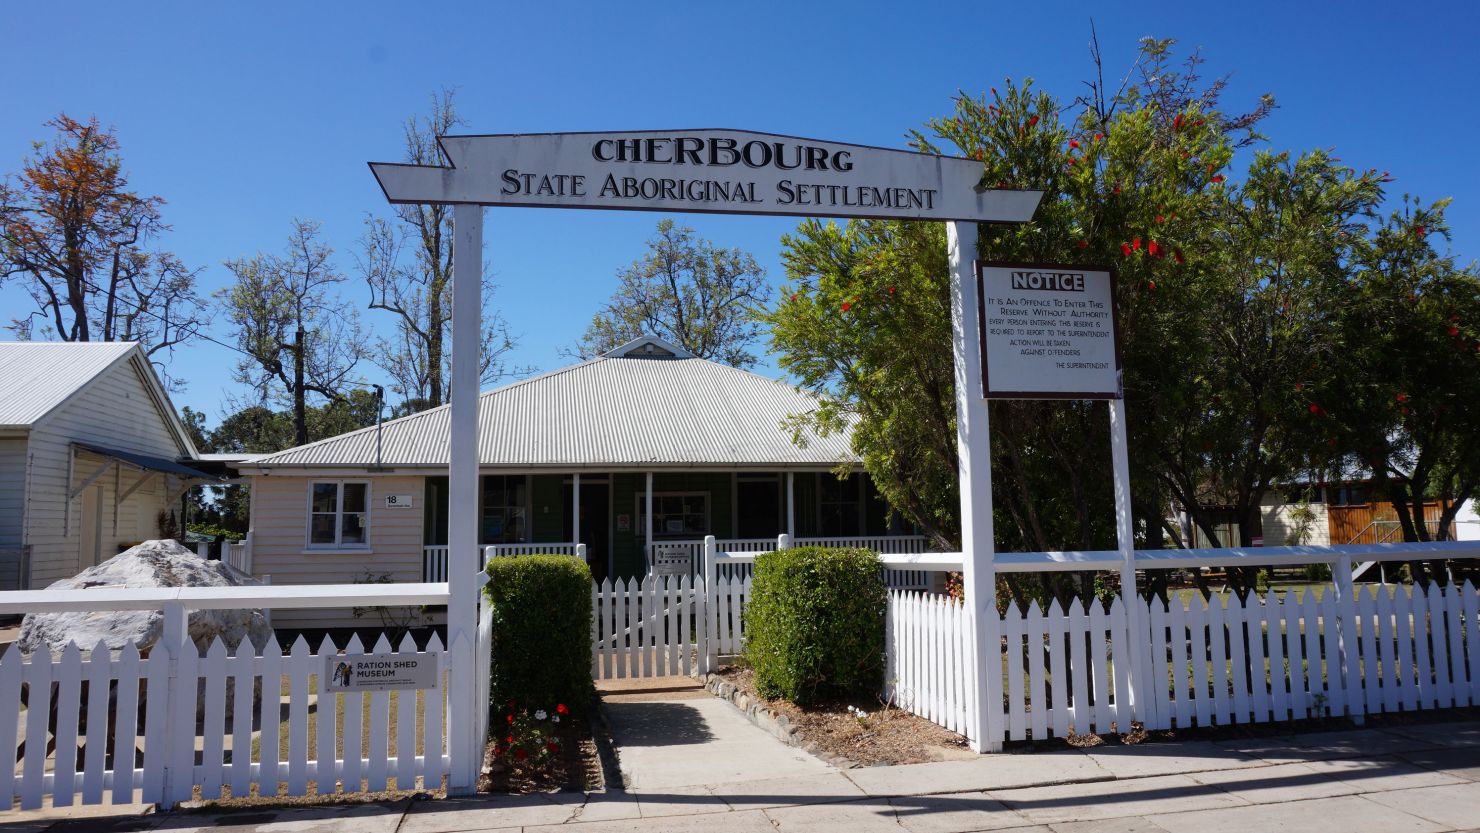 Tourists are invited to learn about Cherbourg's history at the Ration Shed Museum.